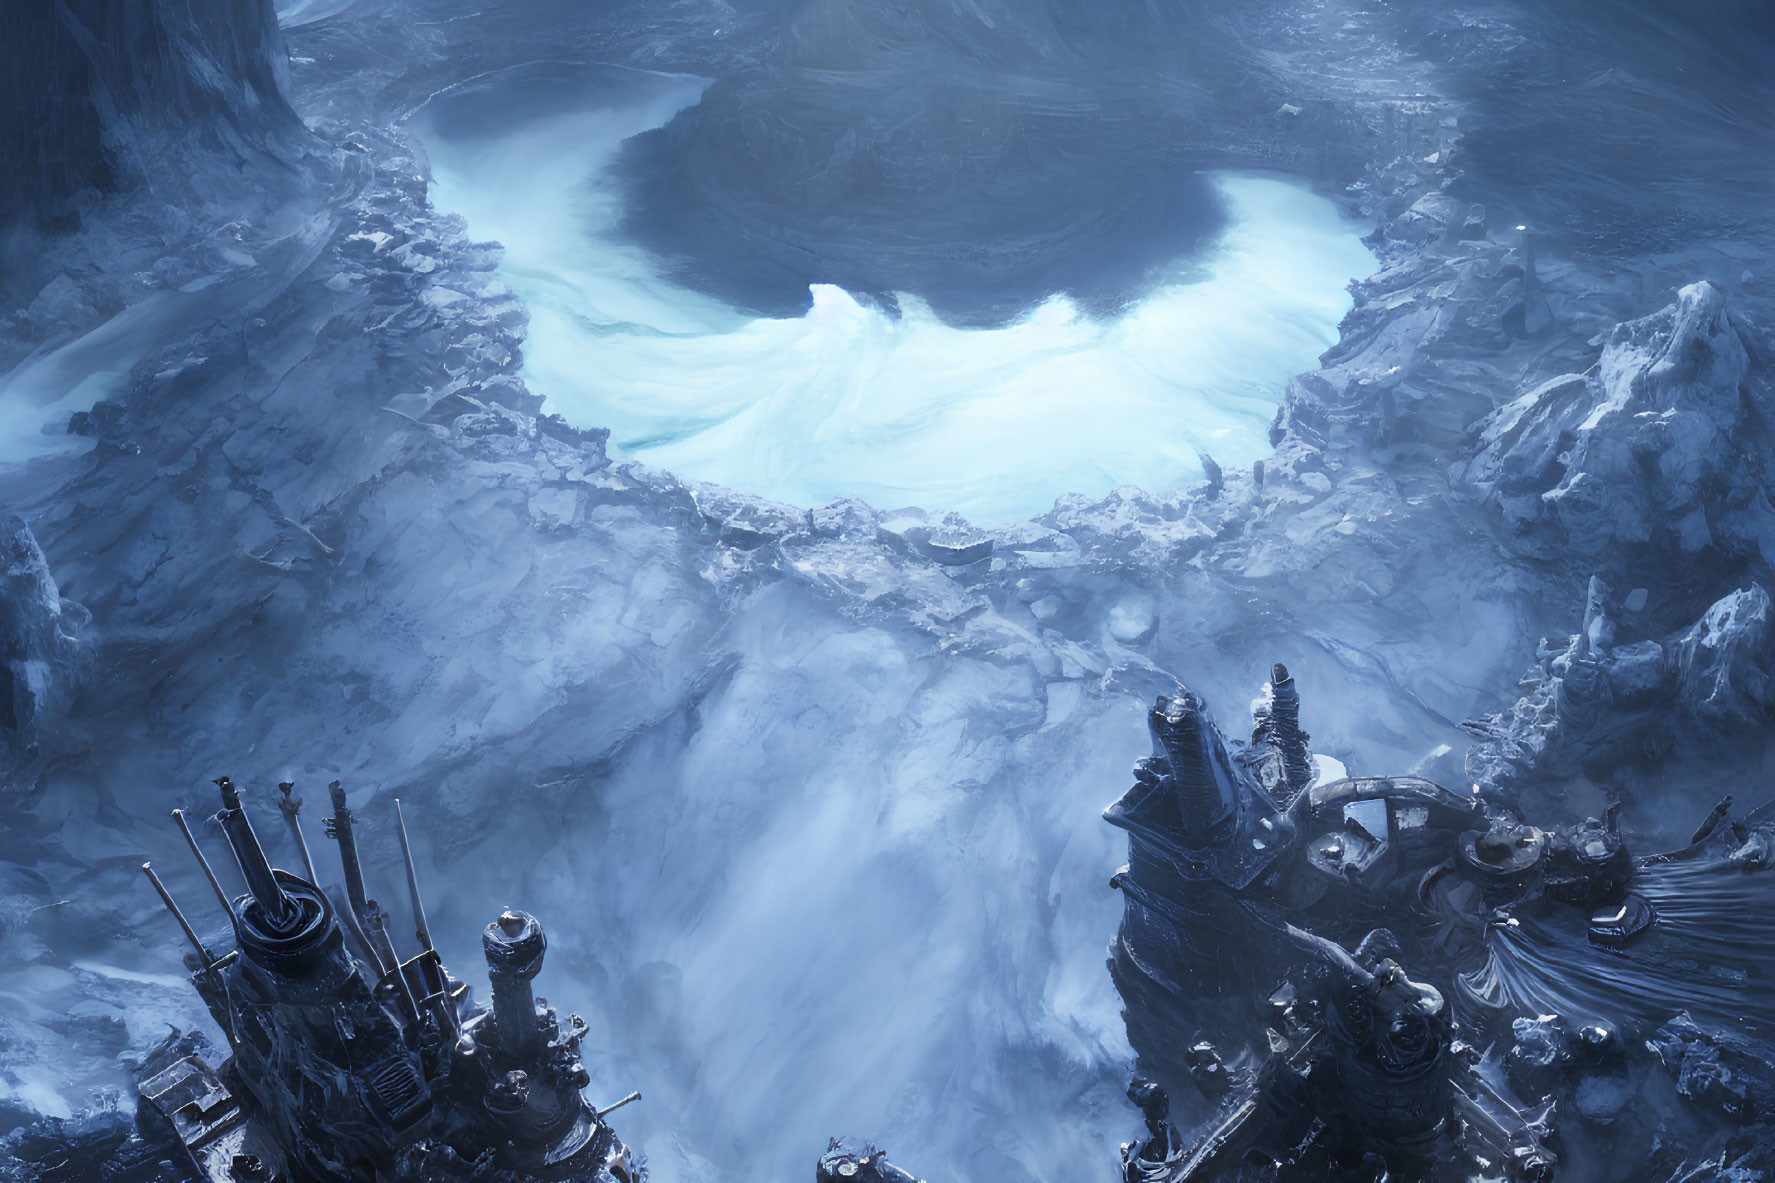 Mystical icy landscape with luminous blue whirlpool and abandoned structures.